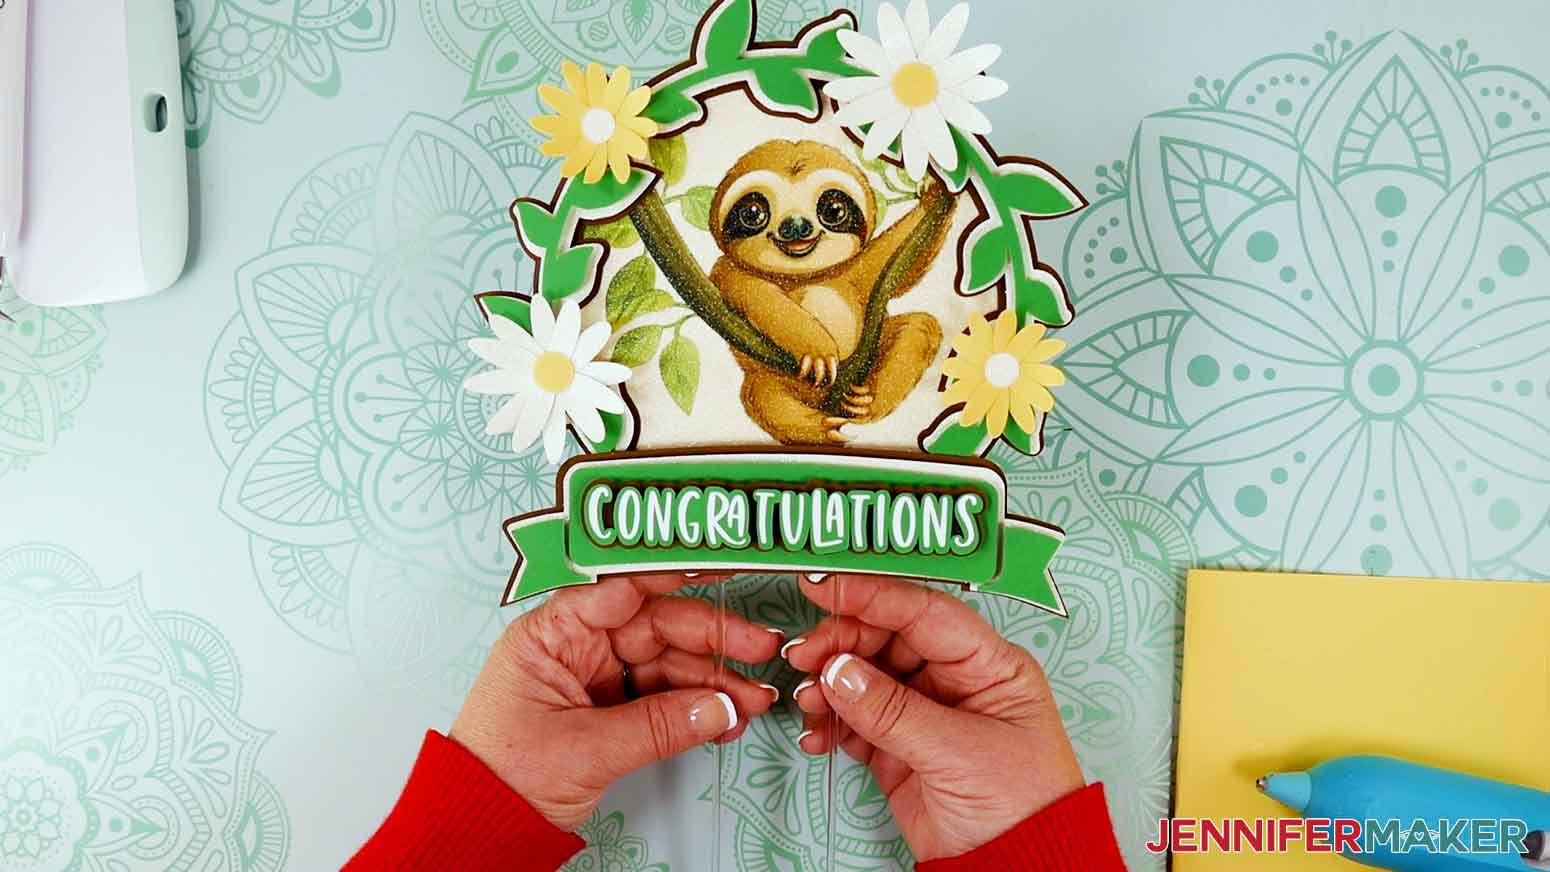 Complete sublimation sloth cake topper with congratulations sentiment.